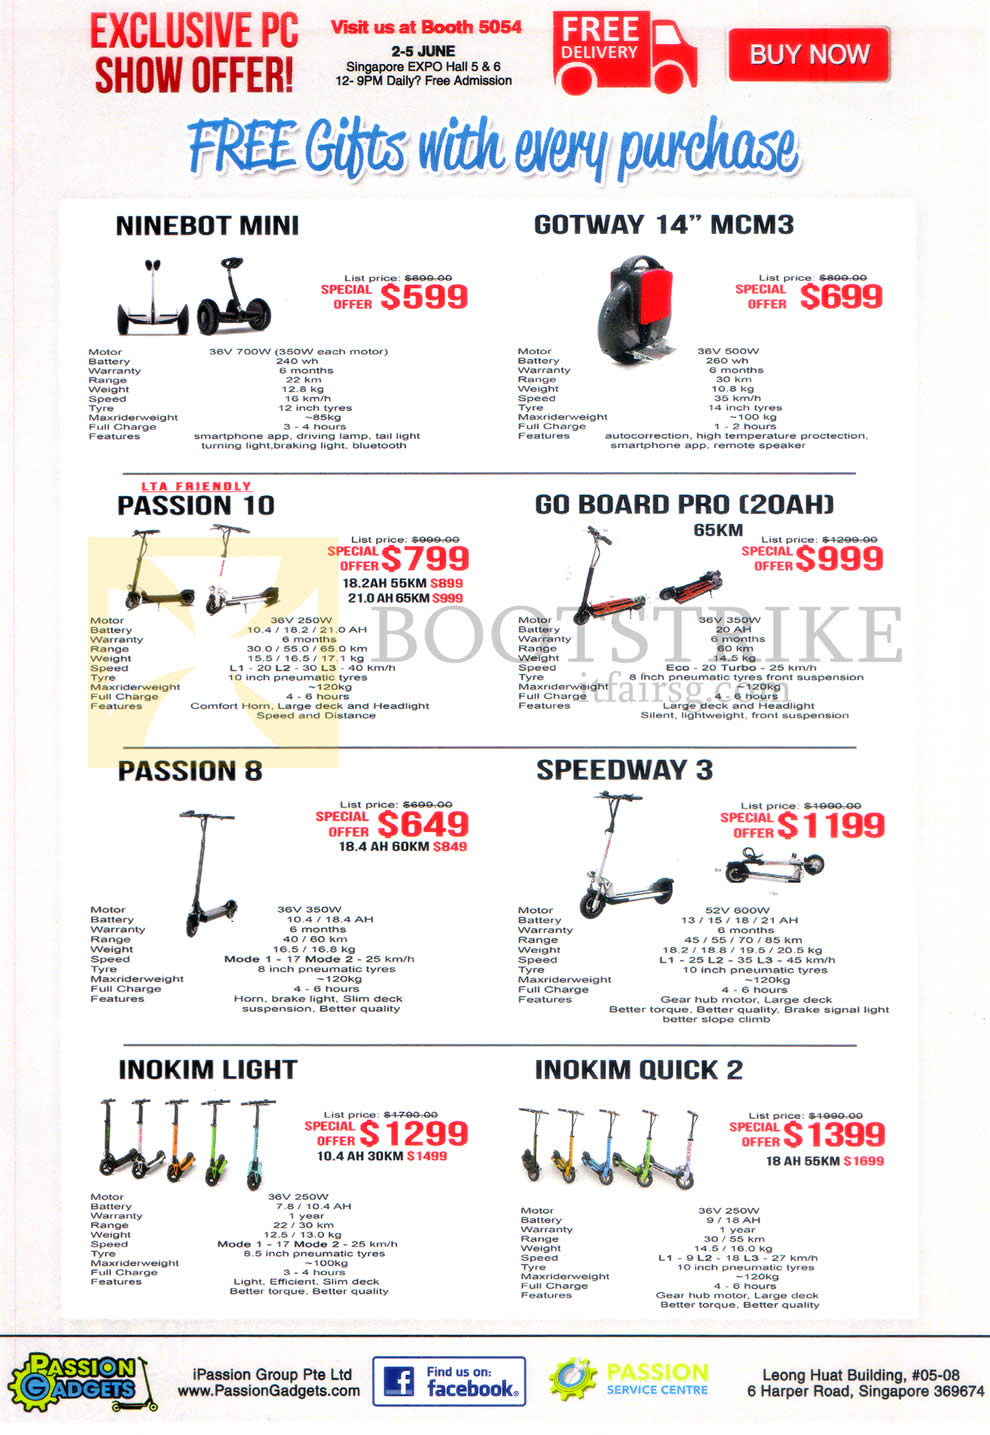 PC SHOW 2016 price list image brochure of Passion Gadgets E-scooters Ninebot Mini, Gotway 14 Mcm3, Passion 10, Go Board Pro (20ah), Passion 8, Speedway 3, Inokim Light, Quick 2